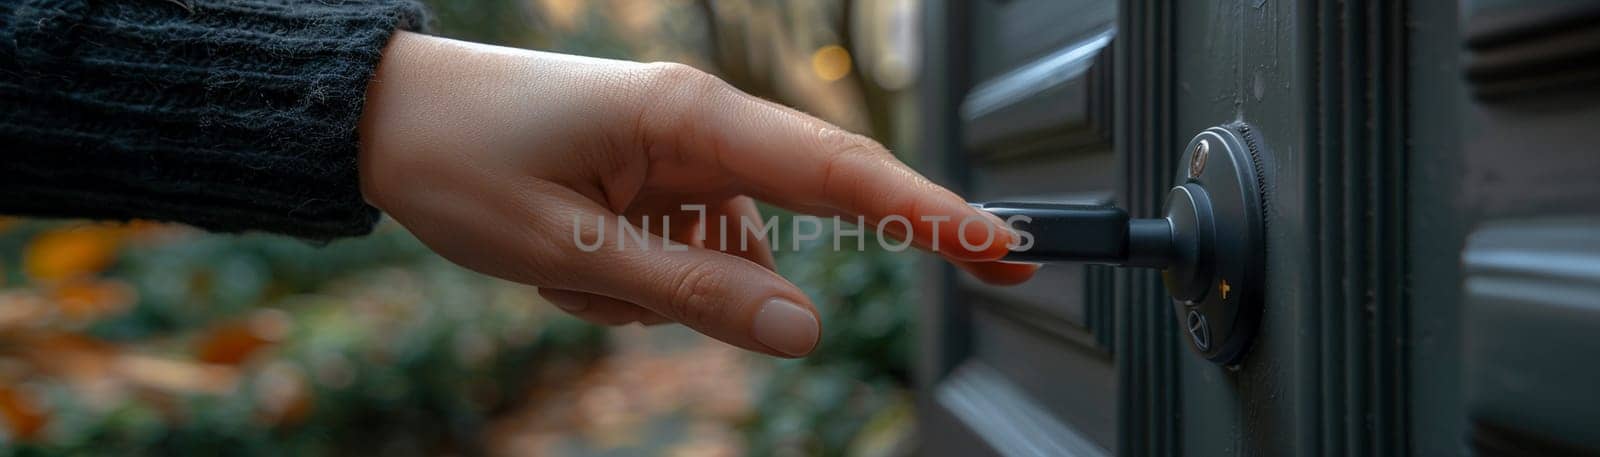 Fingers pressing a doorbell, evoking arrival, visitation, and home interactions.